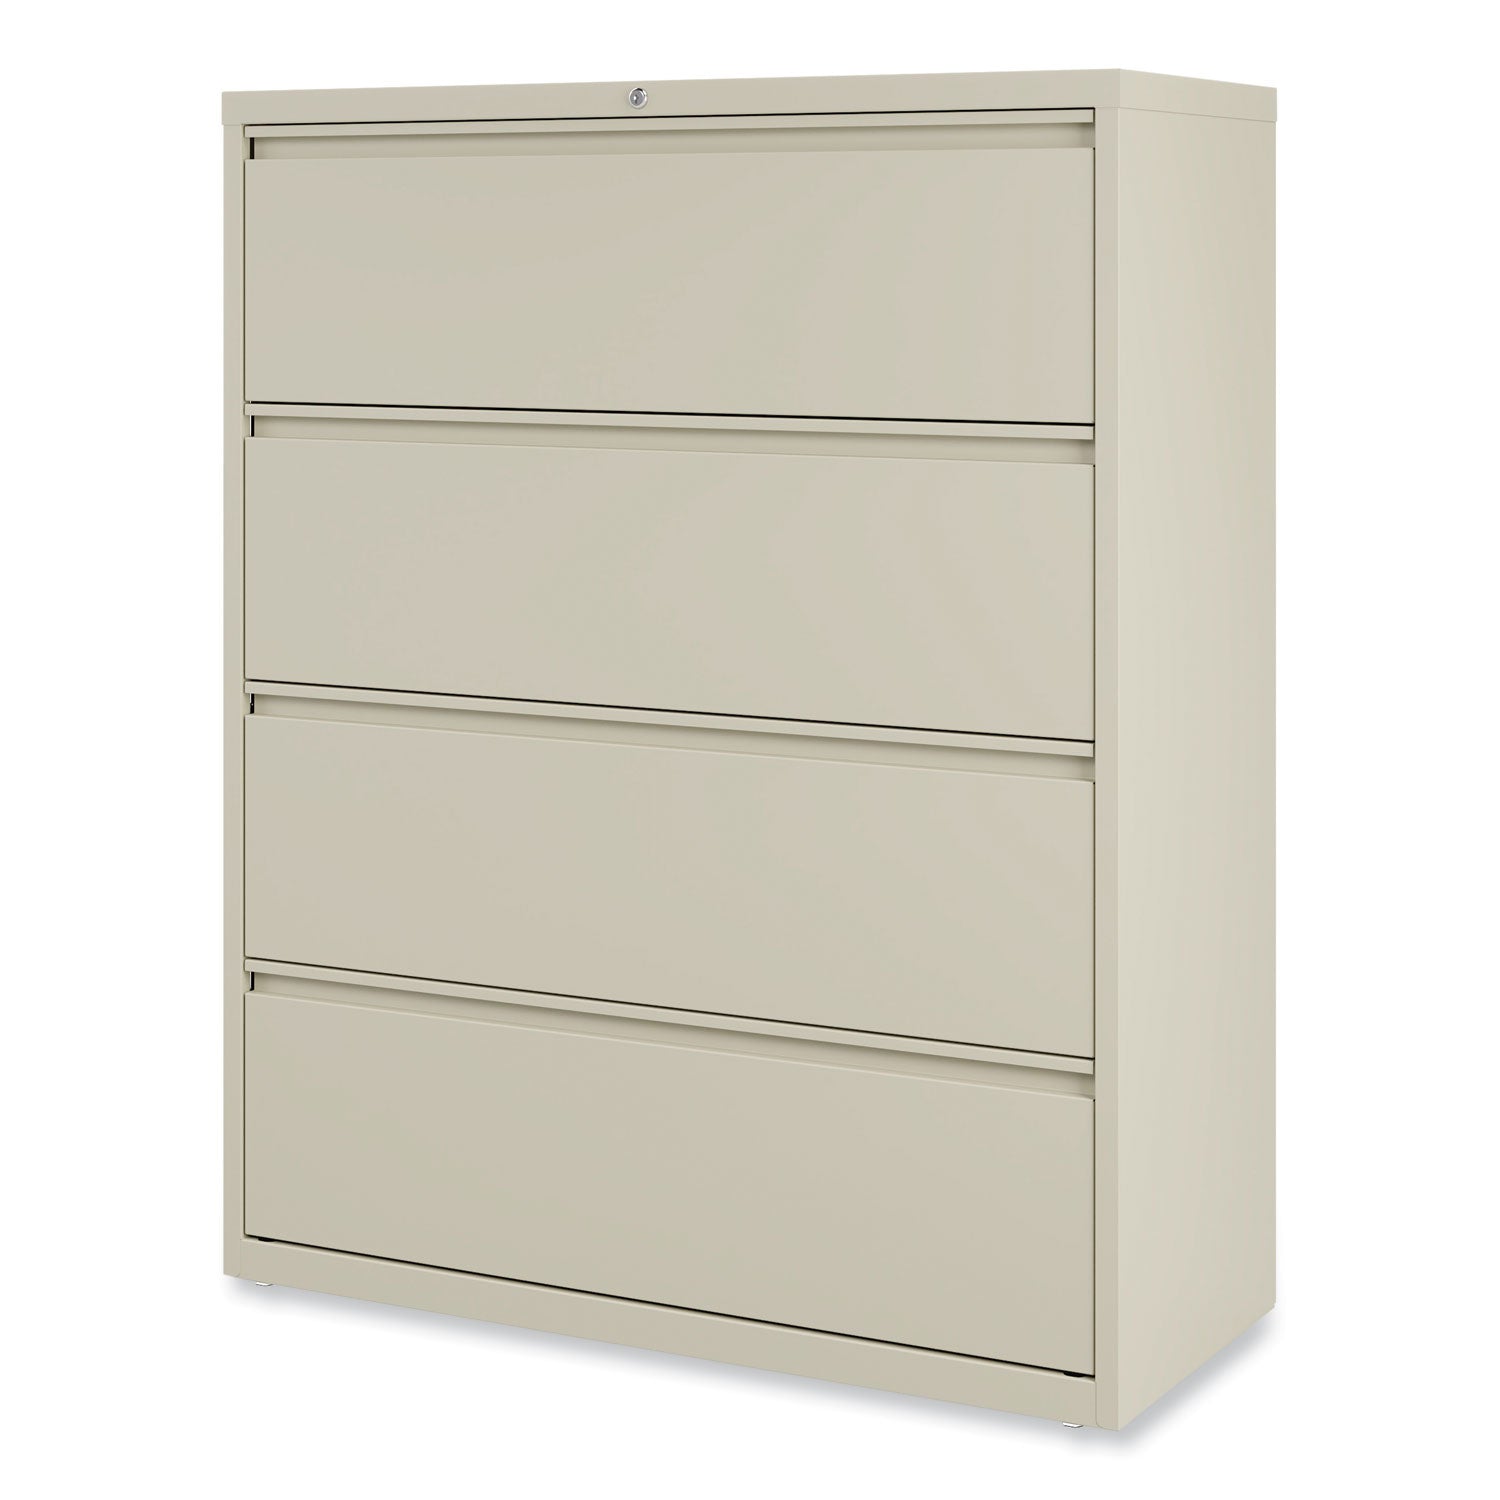 lateral-file-4-legal-letter-size-file-drawers-putty-42-x-1863-x-525_alehlf4254py - 8